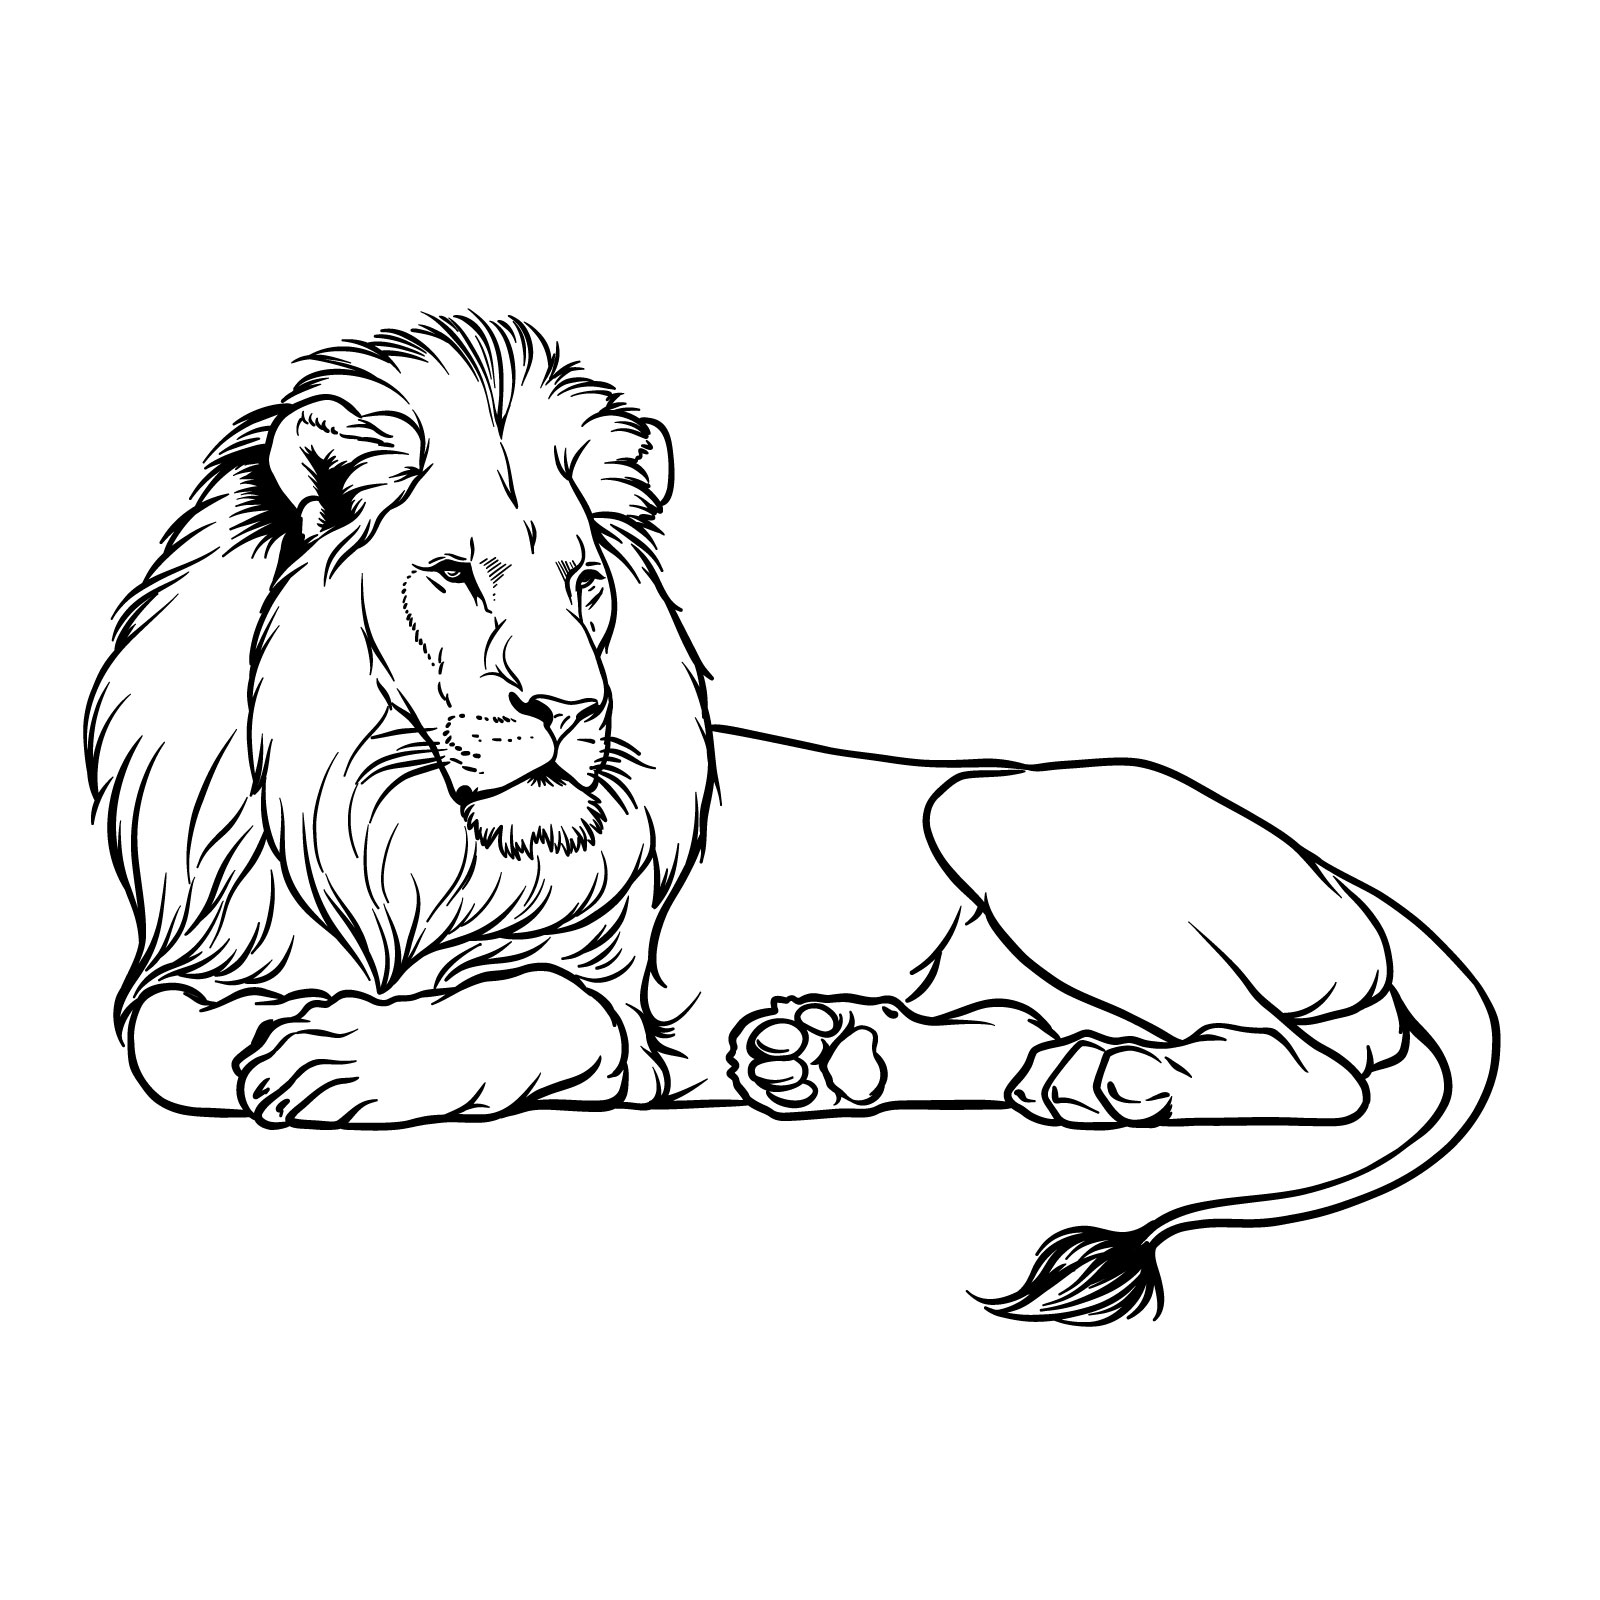 Lying lion side view drawing - easy step-by-step guide